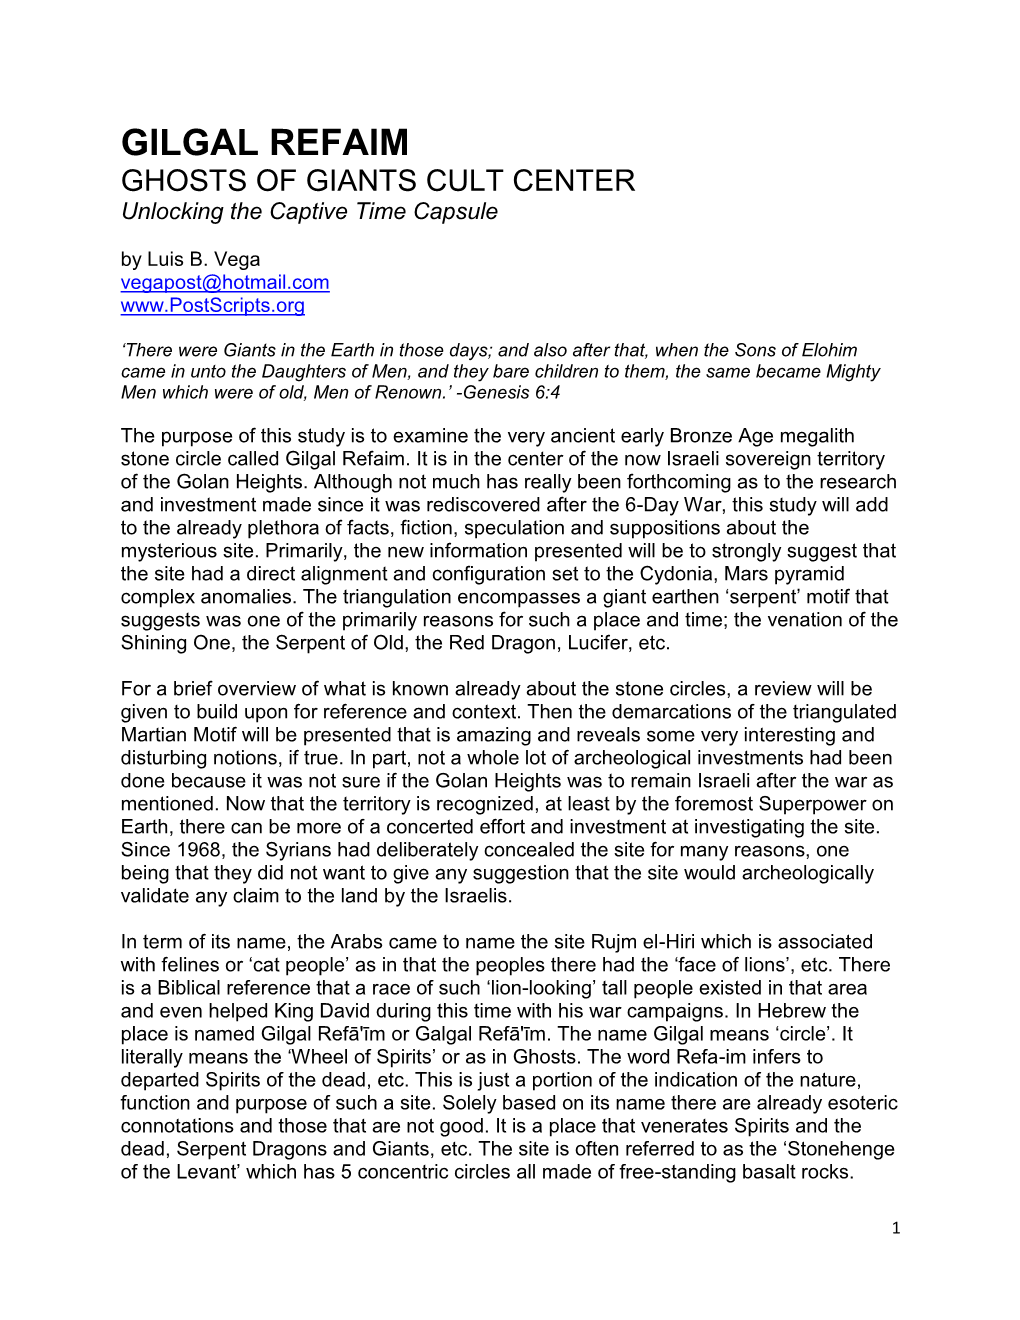 GILGAL REFAIM GHOSTS of GIANTS CULT CENTER Unlocking the Captive Time Capsule by Luis B